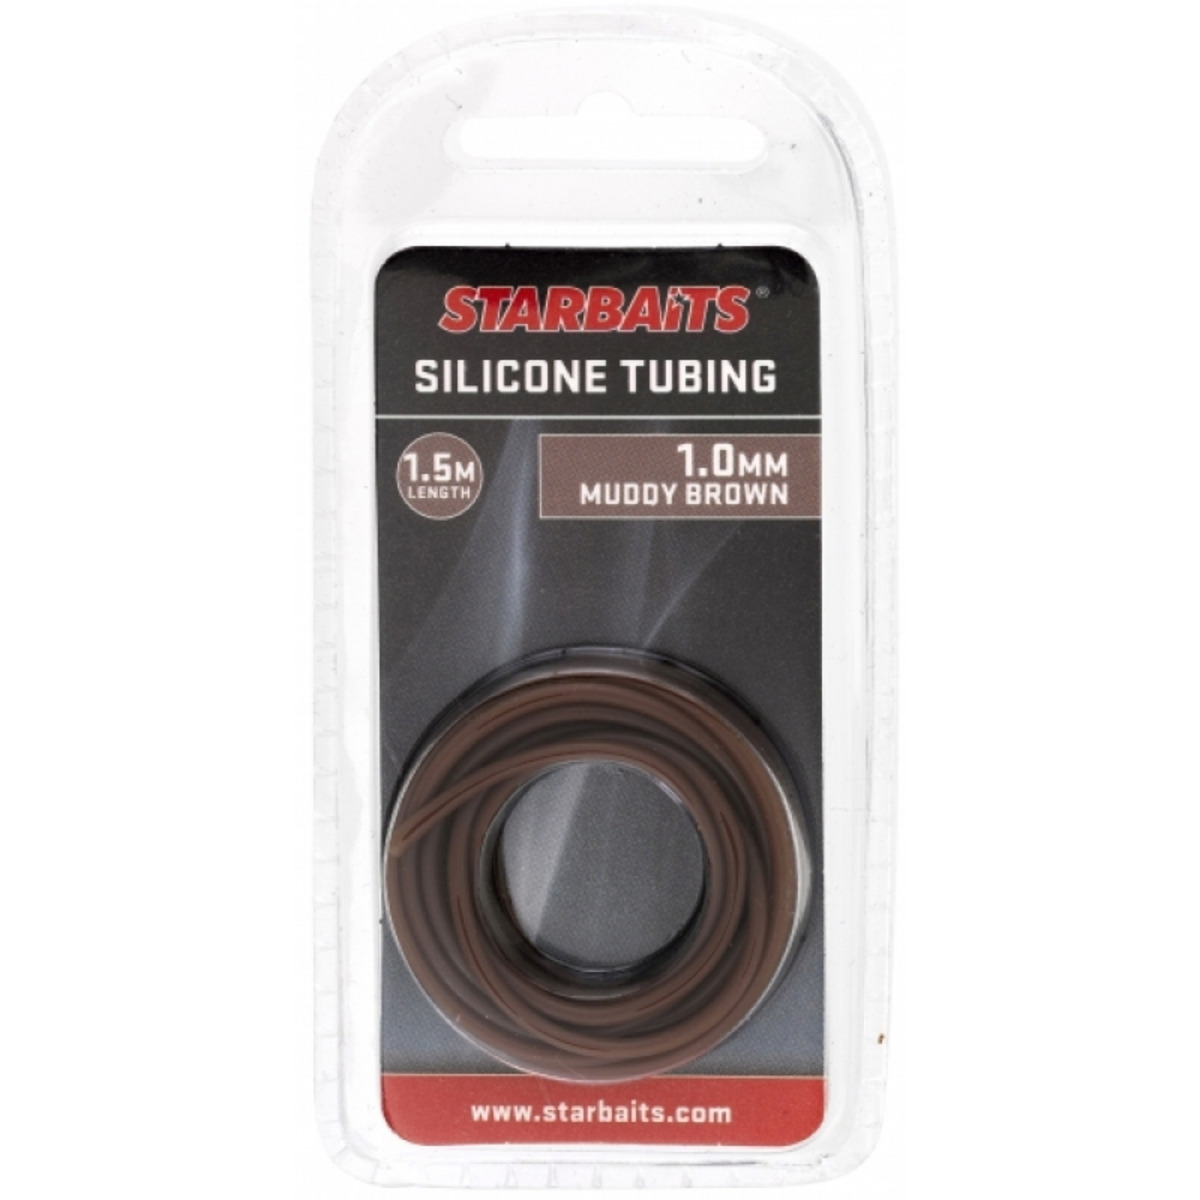 Starbaits Tubing 1.0mm Silicone - MUDDY BROWN